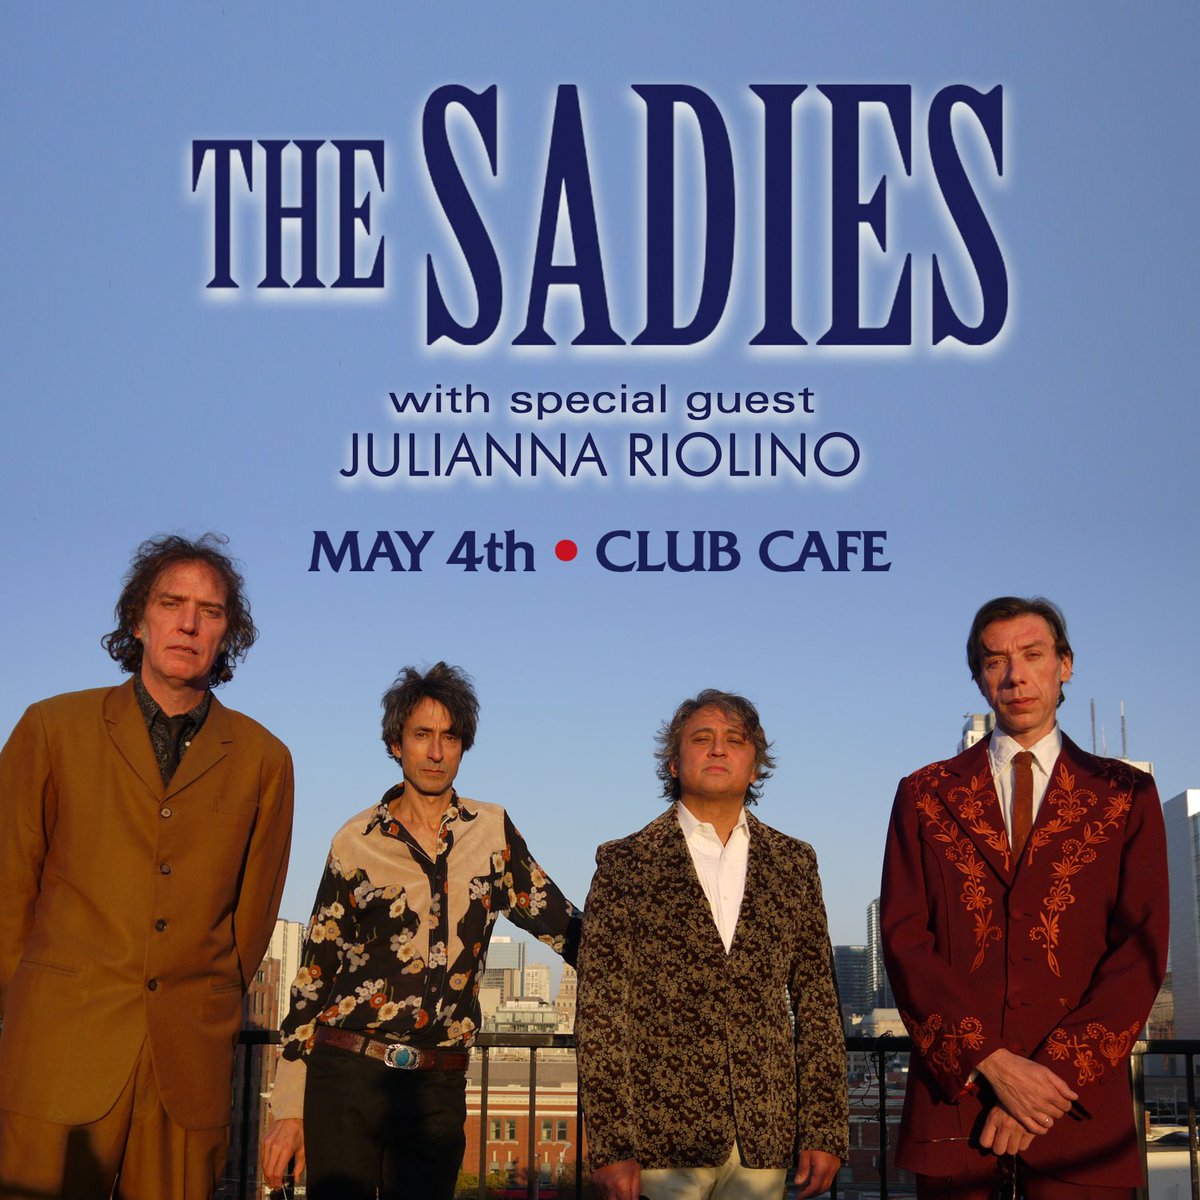 TONIGHT! @TheSadies with Special Guest @jrjuliannasings. Tickets are still available for purchase online or at the door. Buy tickets here: bit.ly/426xikL Doors: 7:00PM